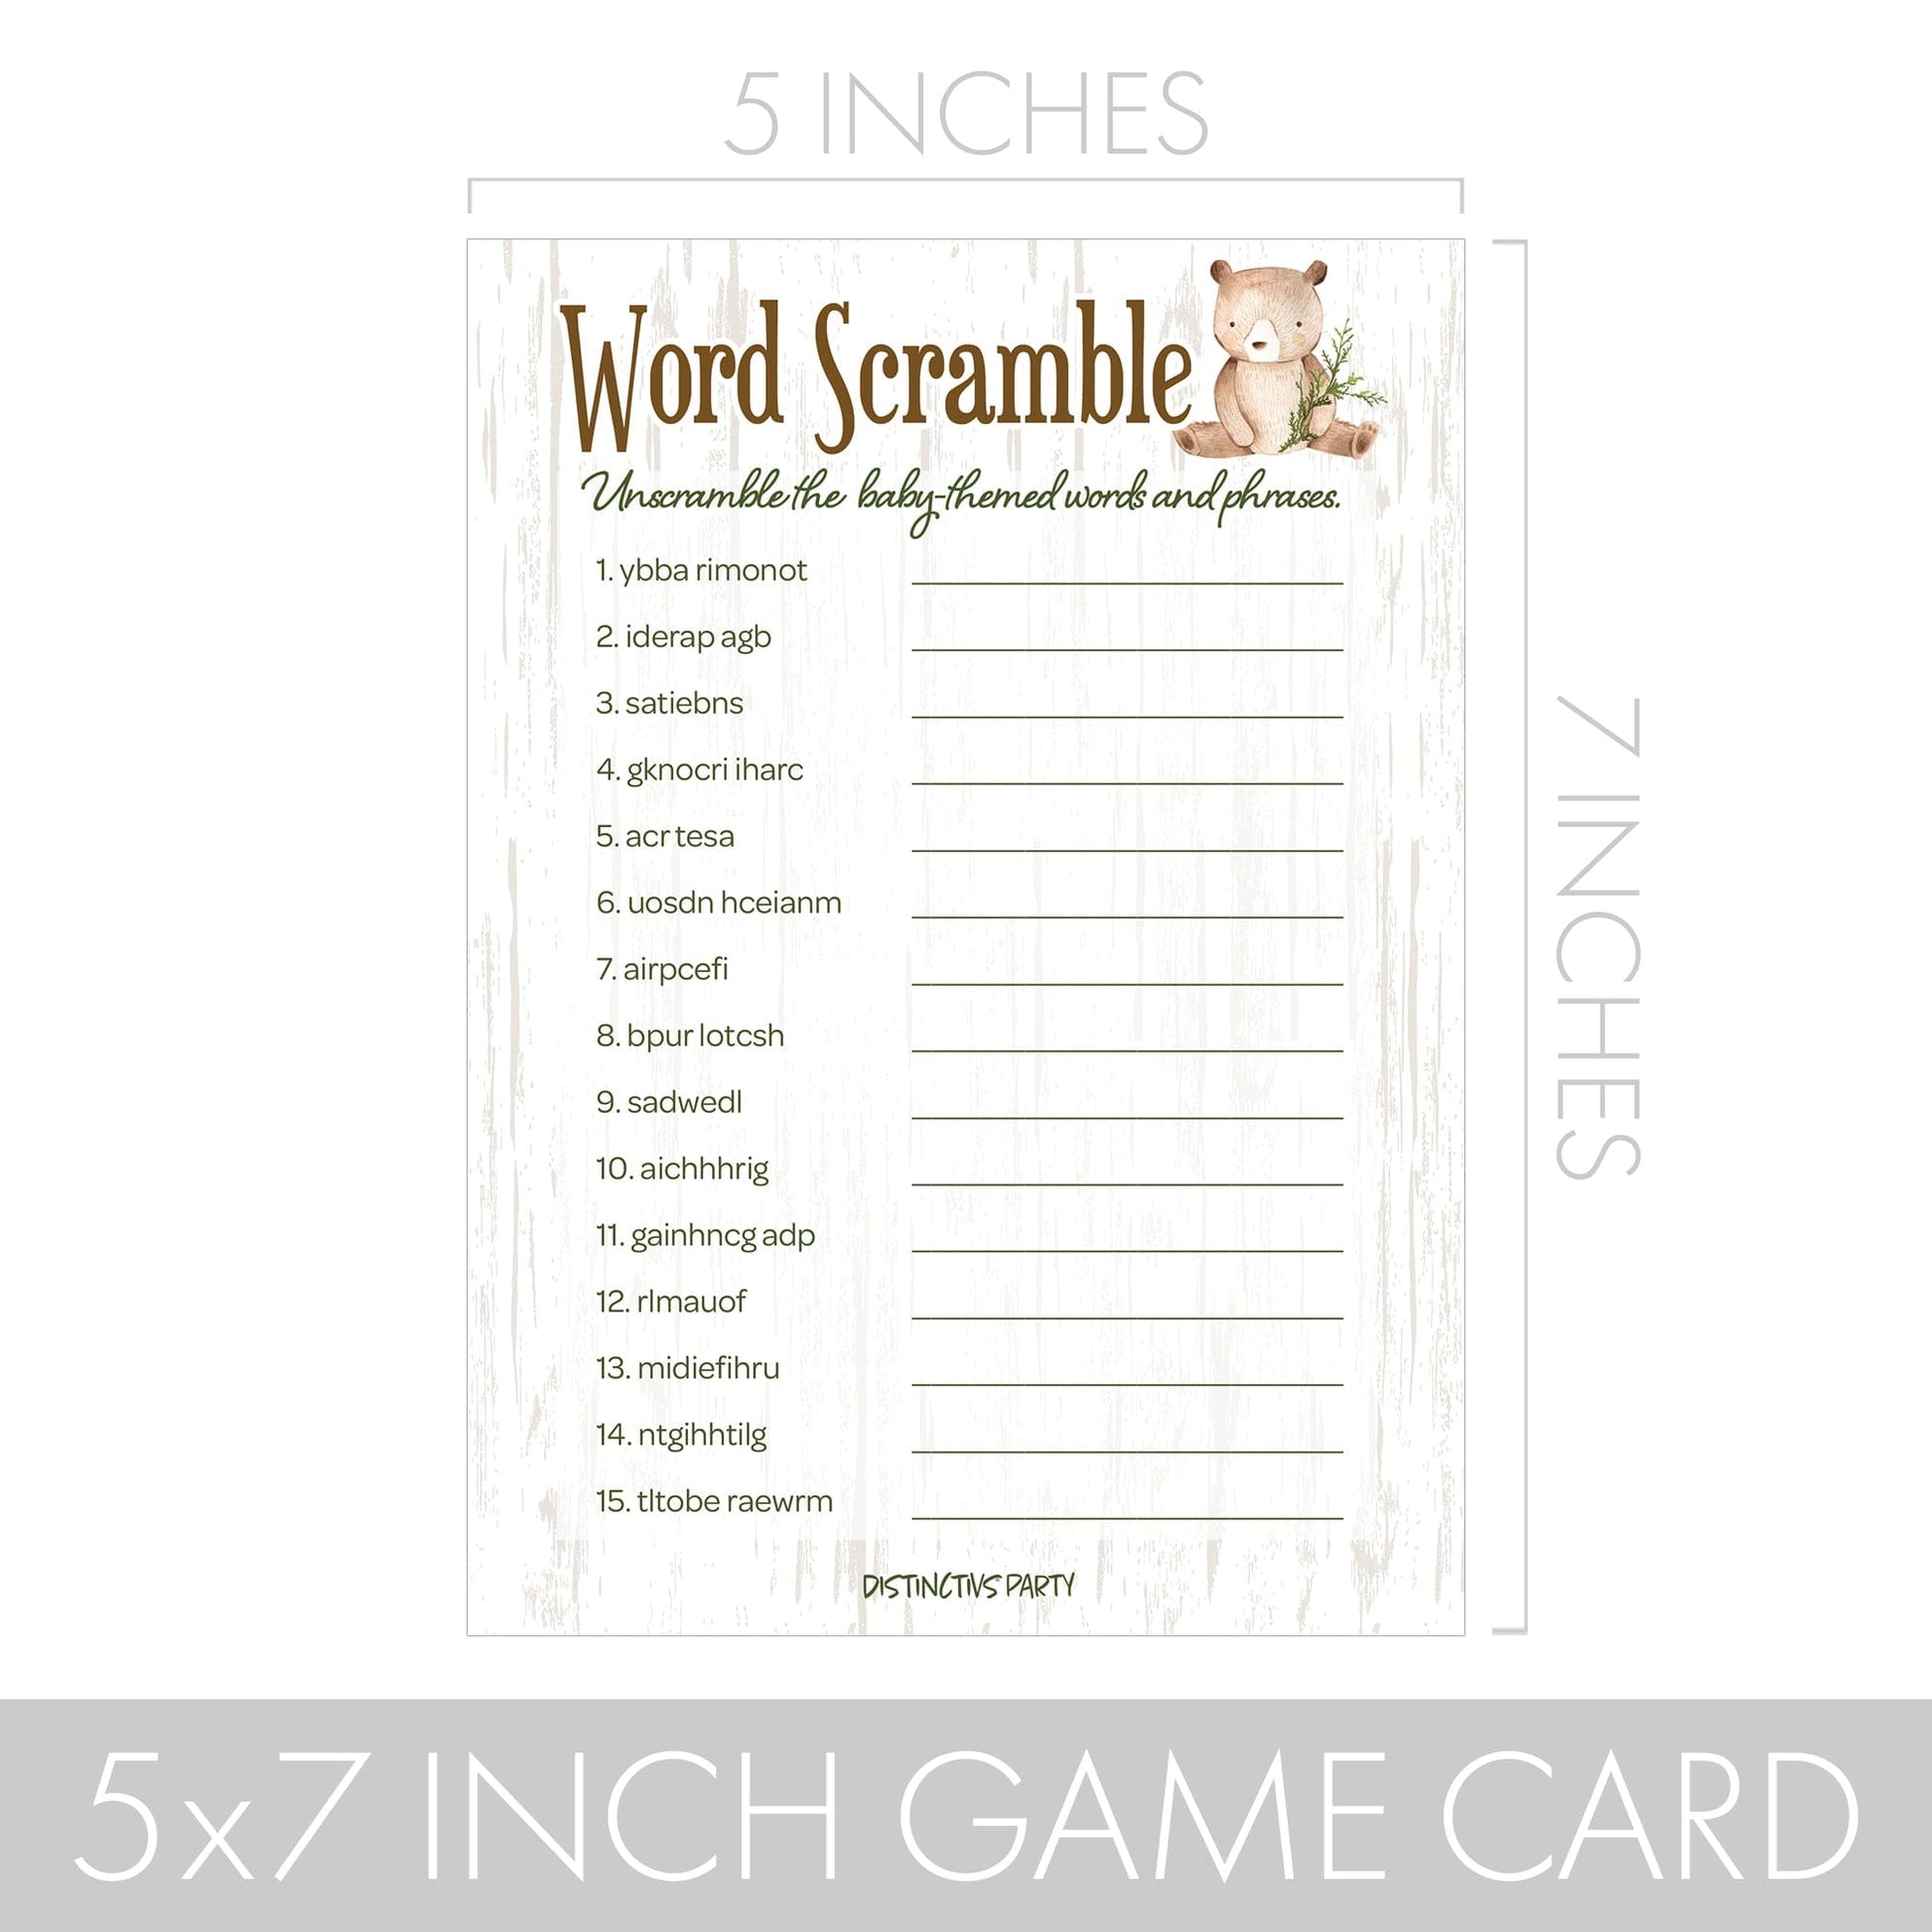 Woodland Bear Baby Shower 2 Game Bundle - What's On Your Phone and Word Scramble - 20 Dual Sided Cards